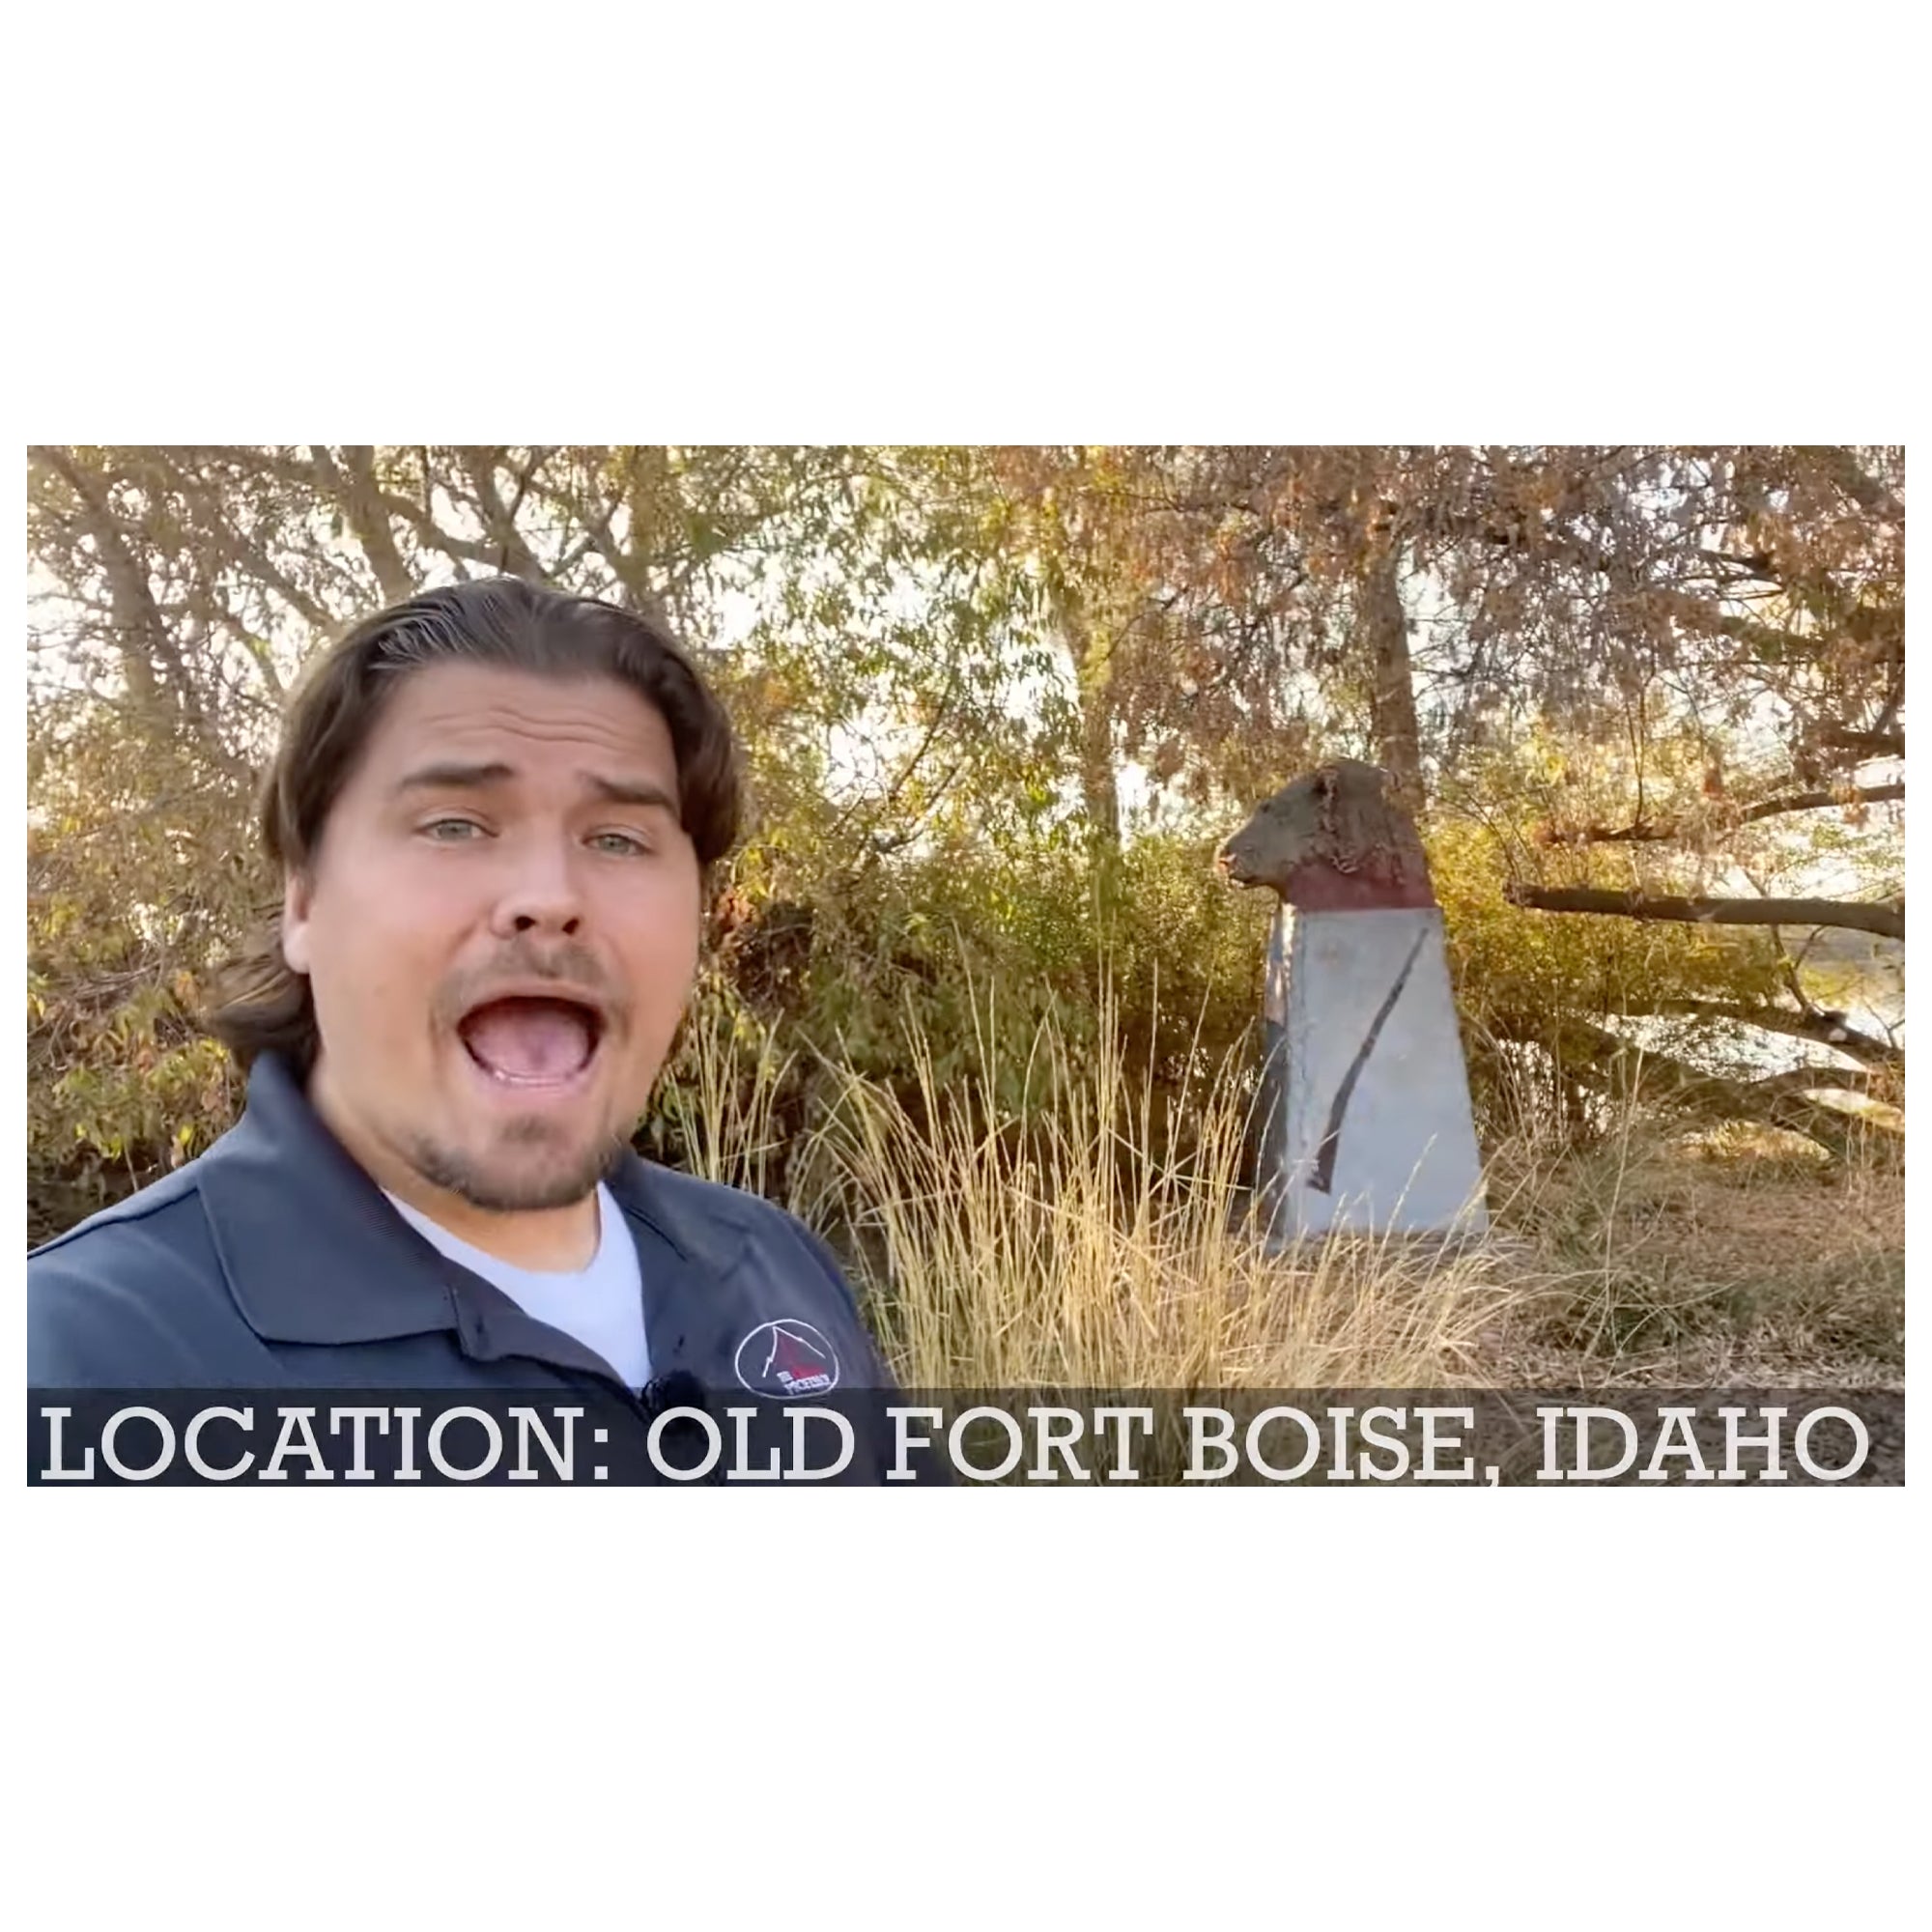 Screen shot of the male host in the middle of speaking. In the background you can see trees and a lion head statue. White text on the bottom of the image reads "Location: Old Fort Boise, Idaho."